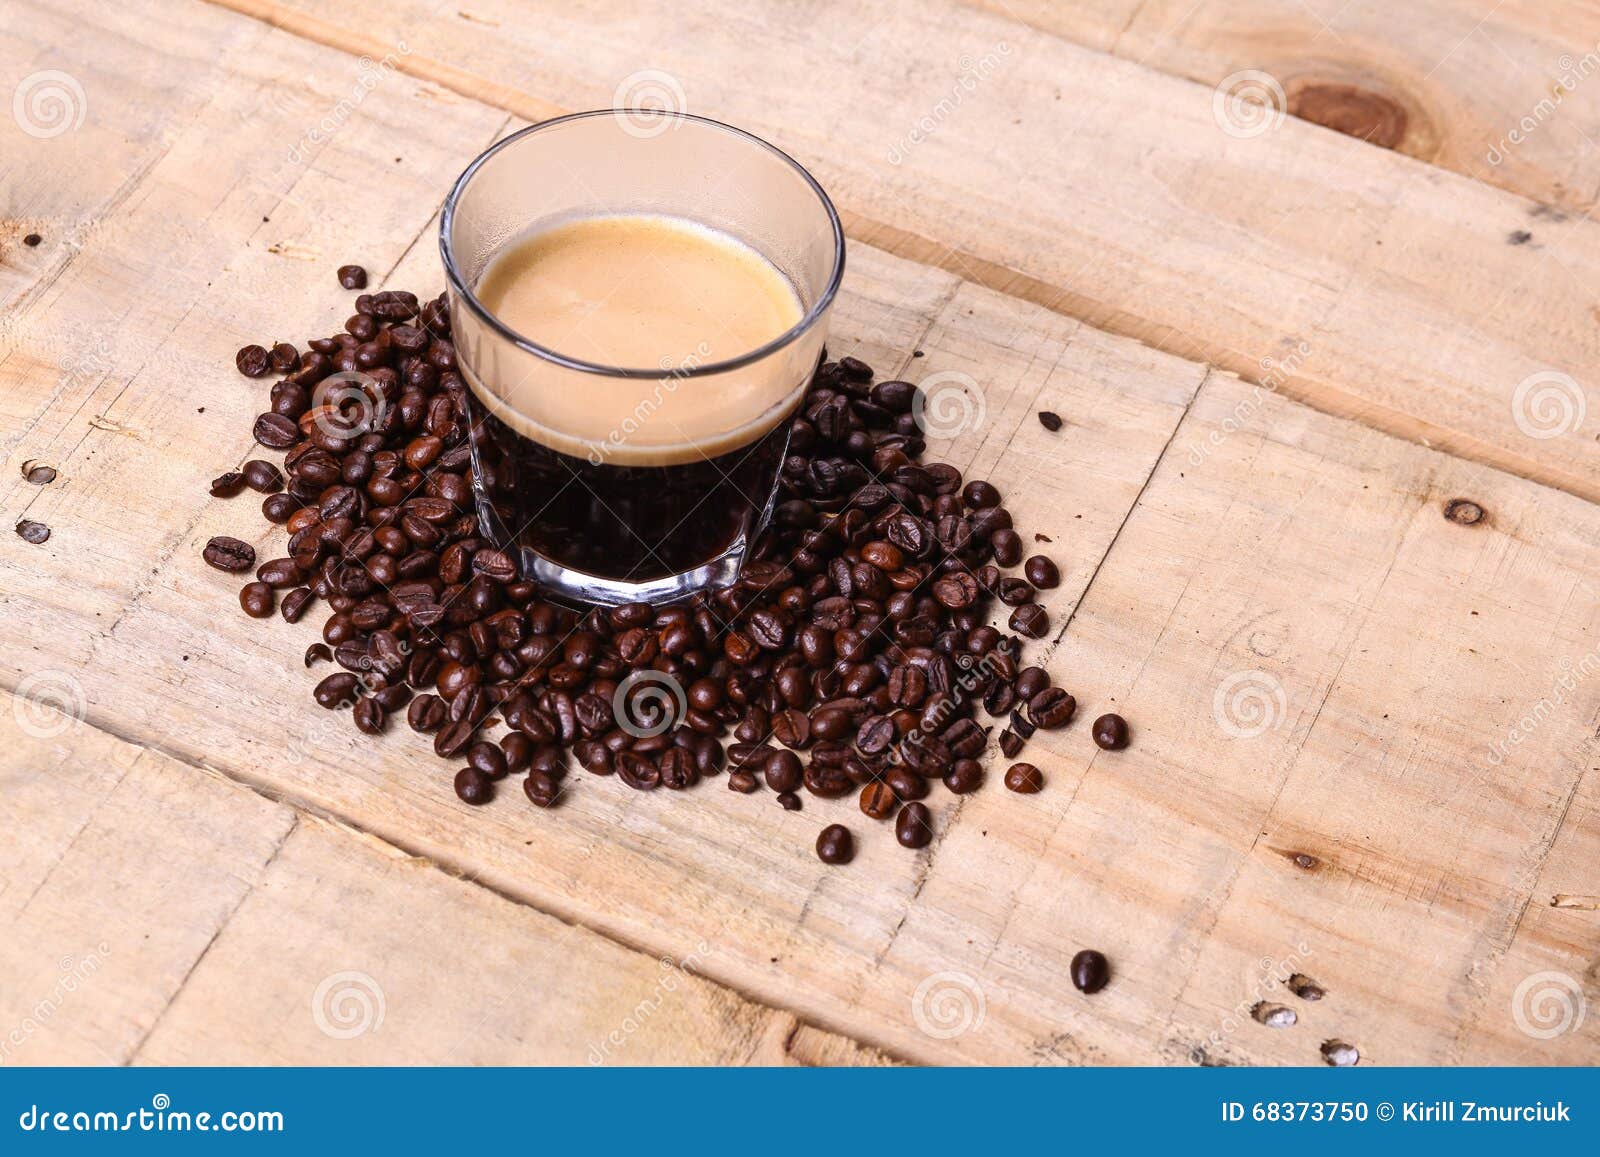 Coffee Beans And Fresh Coffee Stock Photo - Image of morning, tumbler